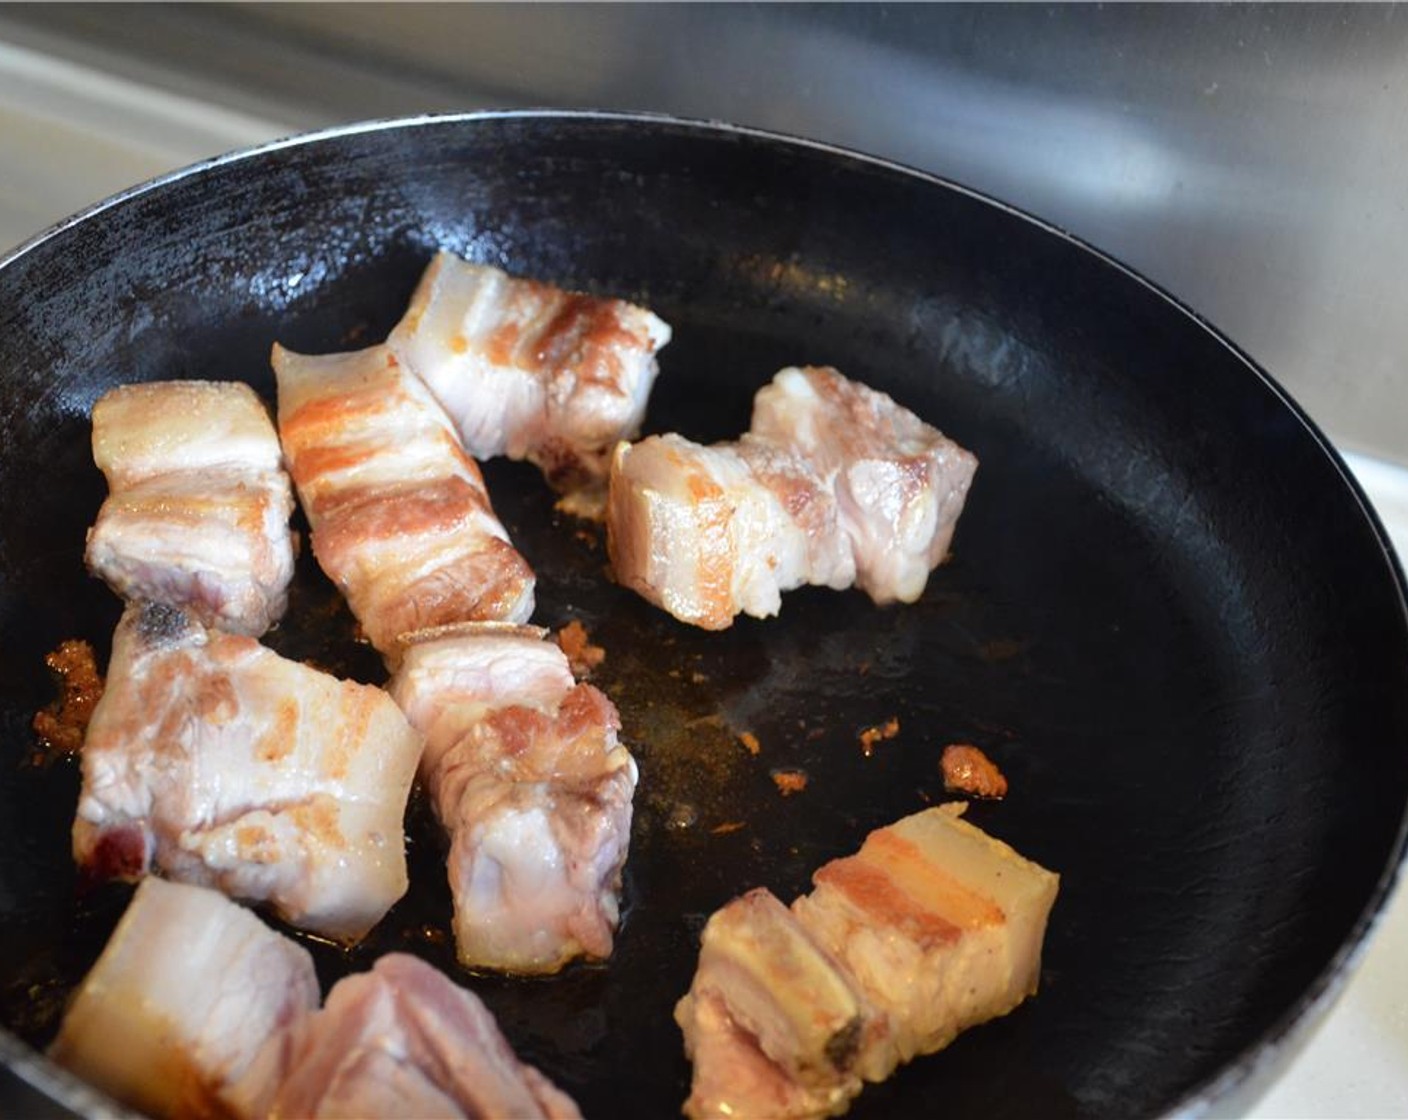 step 6 Heat a wok or cast iron pan over medium high heat and sear the pork belly for 5 minutes, making sure to evenly brown on each side. When nice and brown and plenty of fat has rendered, remove the pork and set aside. Drain fat from pan.